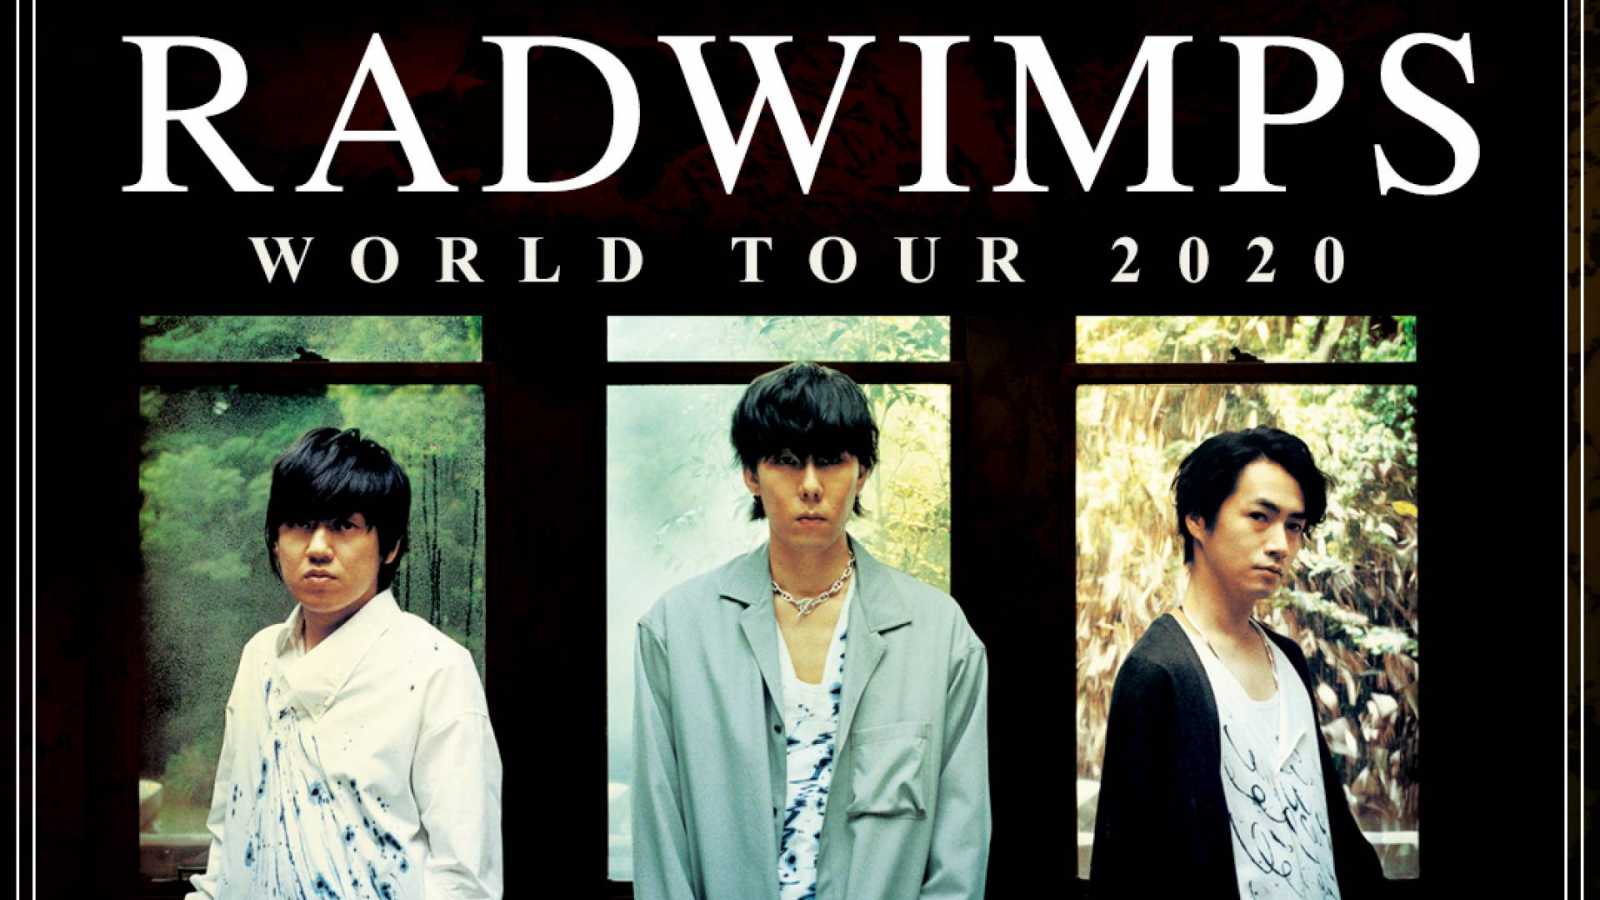 RADWIMPS Cancels World Tour and Releases New Digital Single © UNIVERSAL MUSIC JAPAN